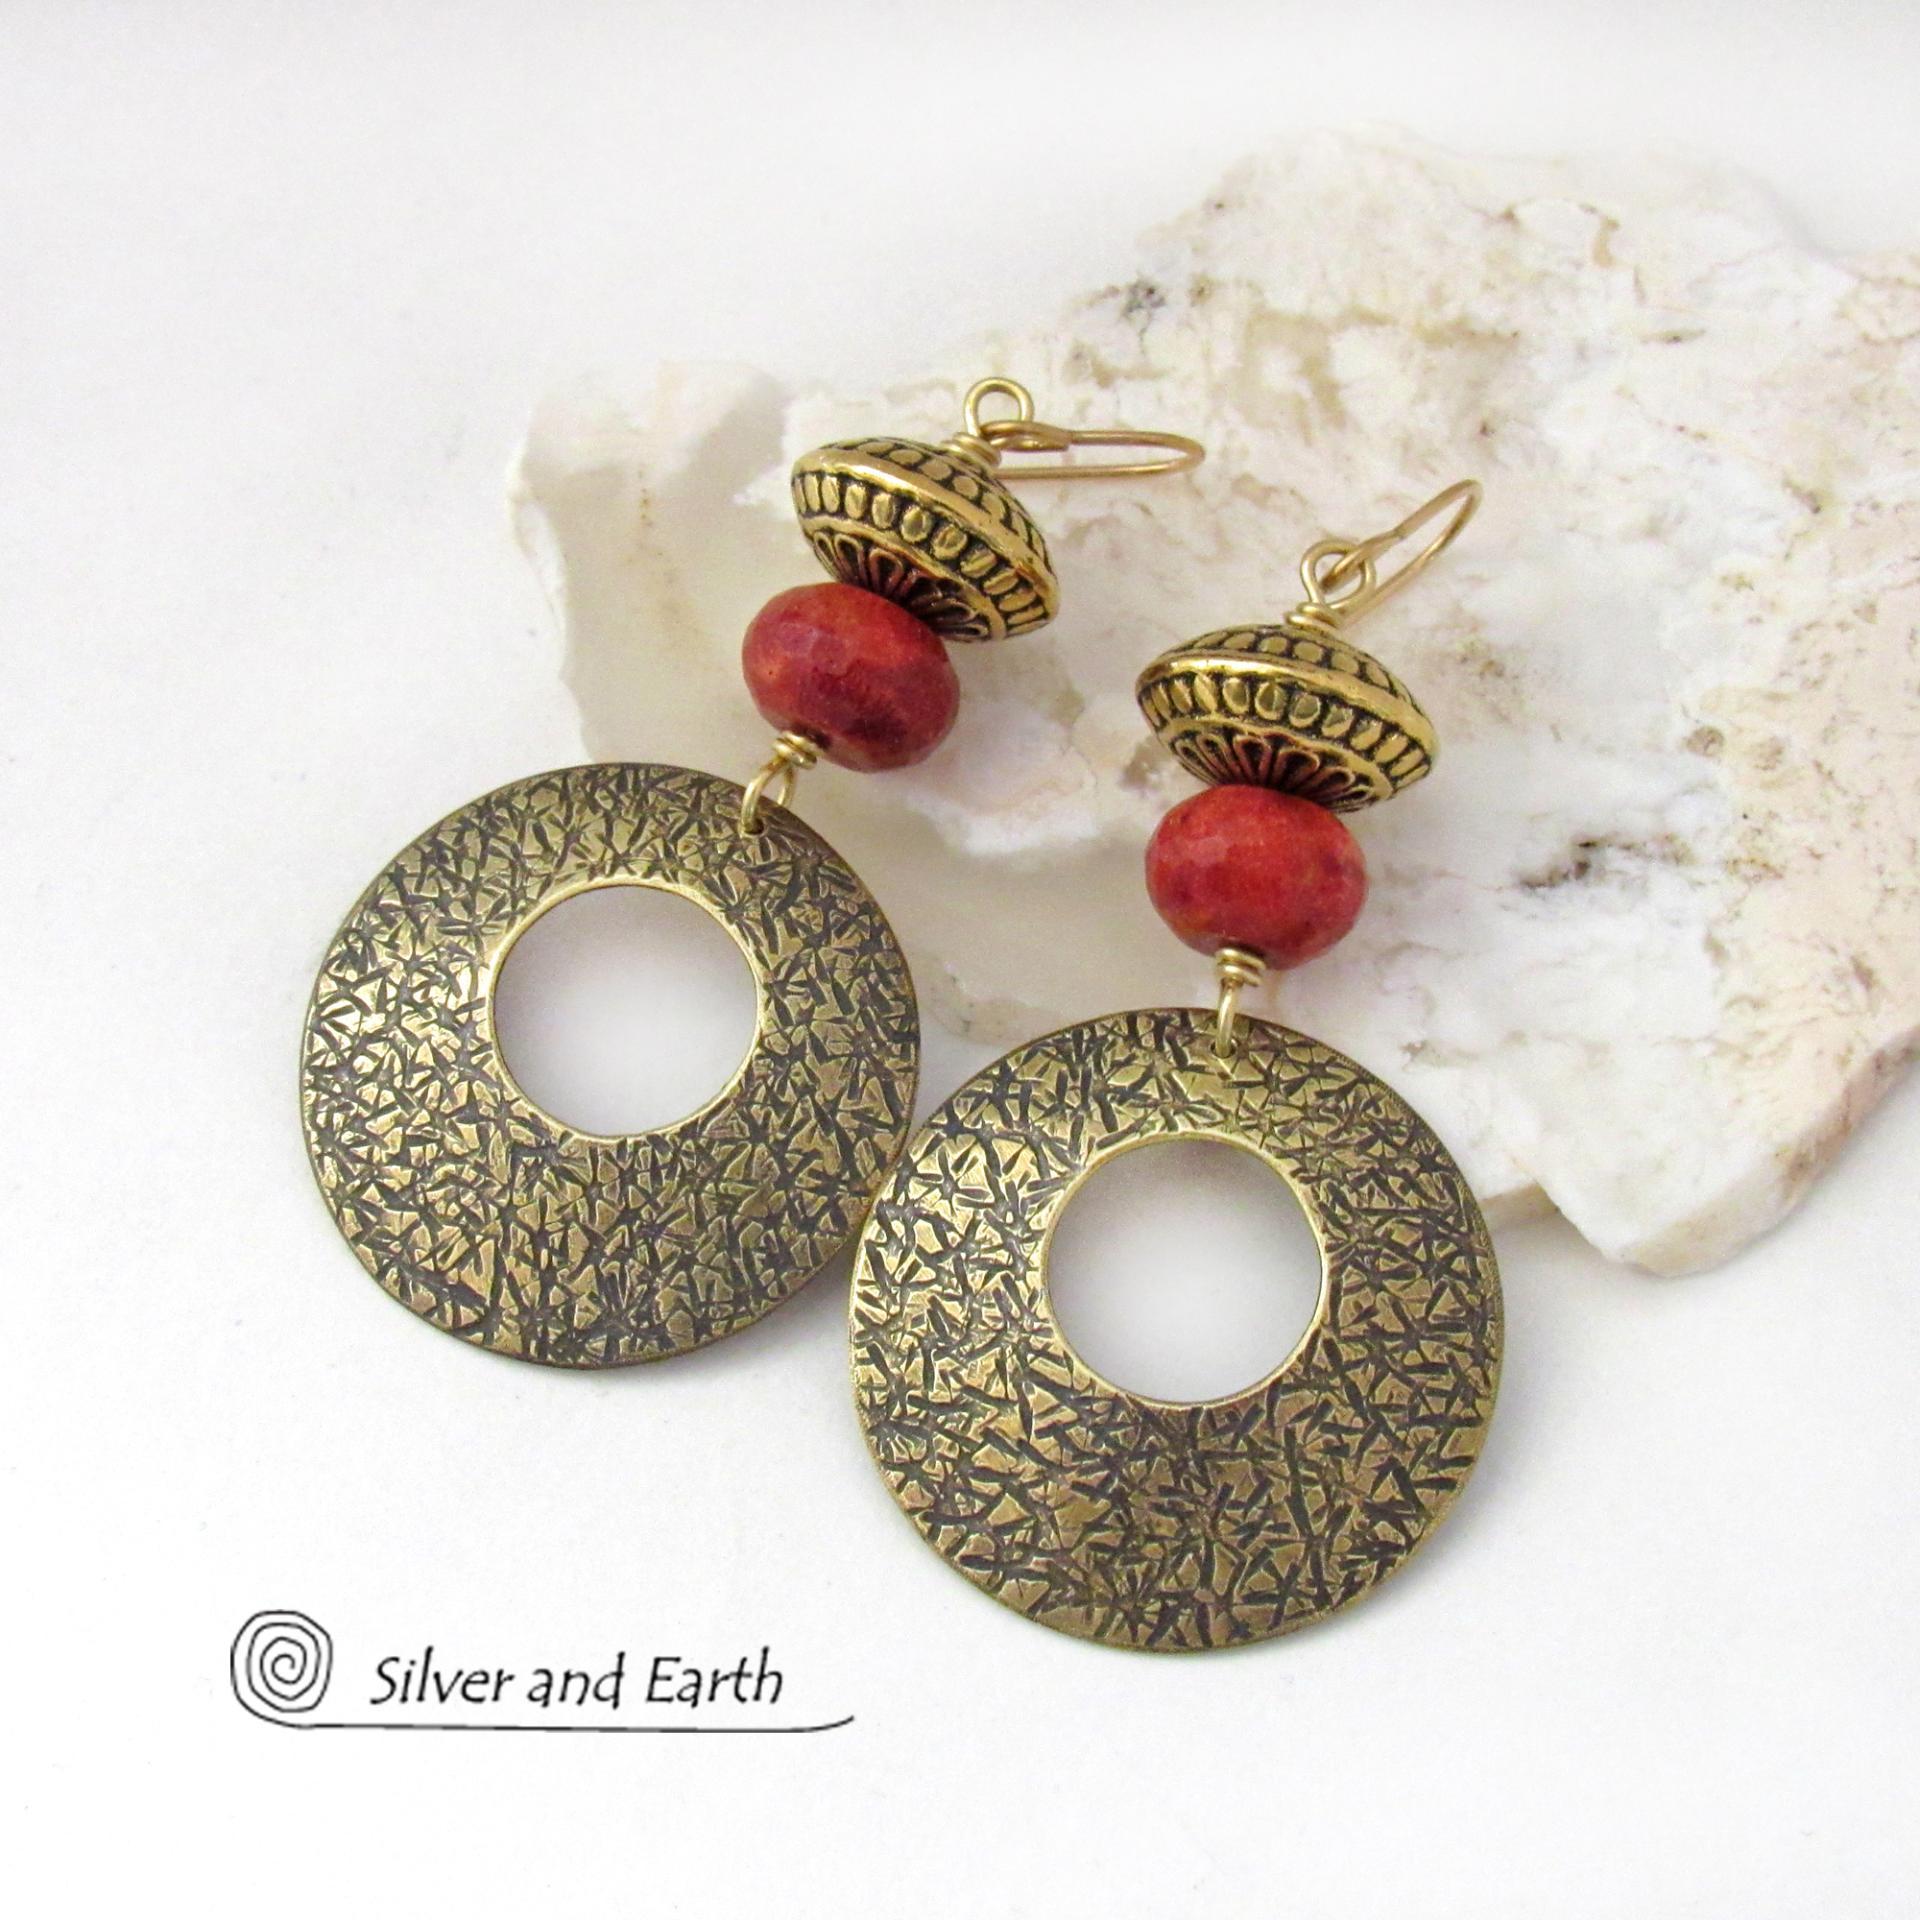 Textured Gold Brass Hoop Earrings with Faceted Red Coral & Brass Tribal Beads - Bold Modern Boho Chic Statement Jewelry 